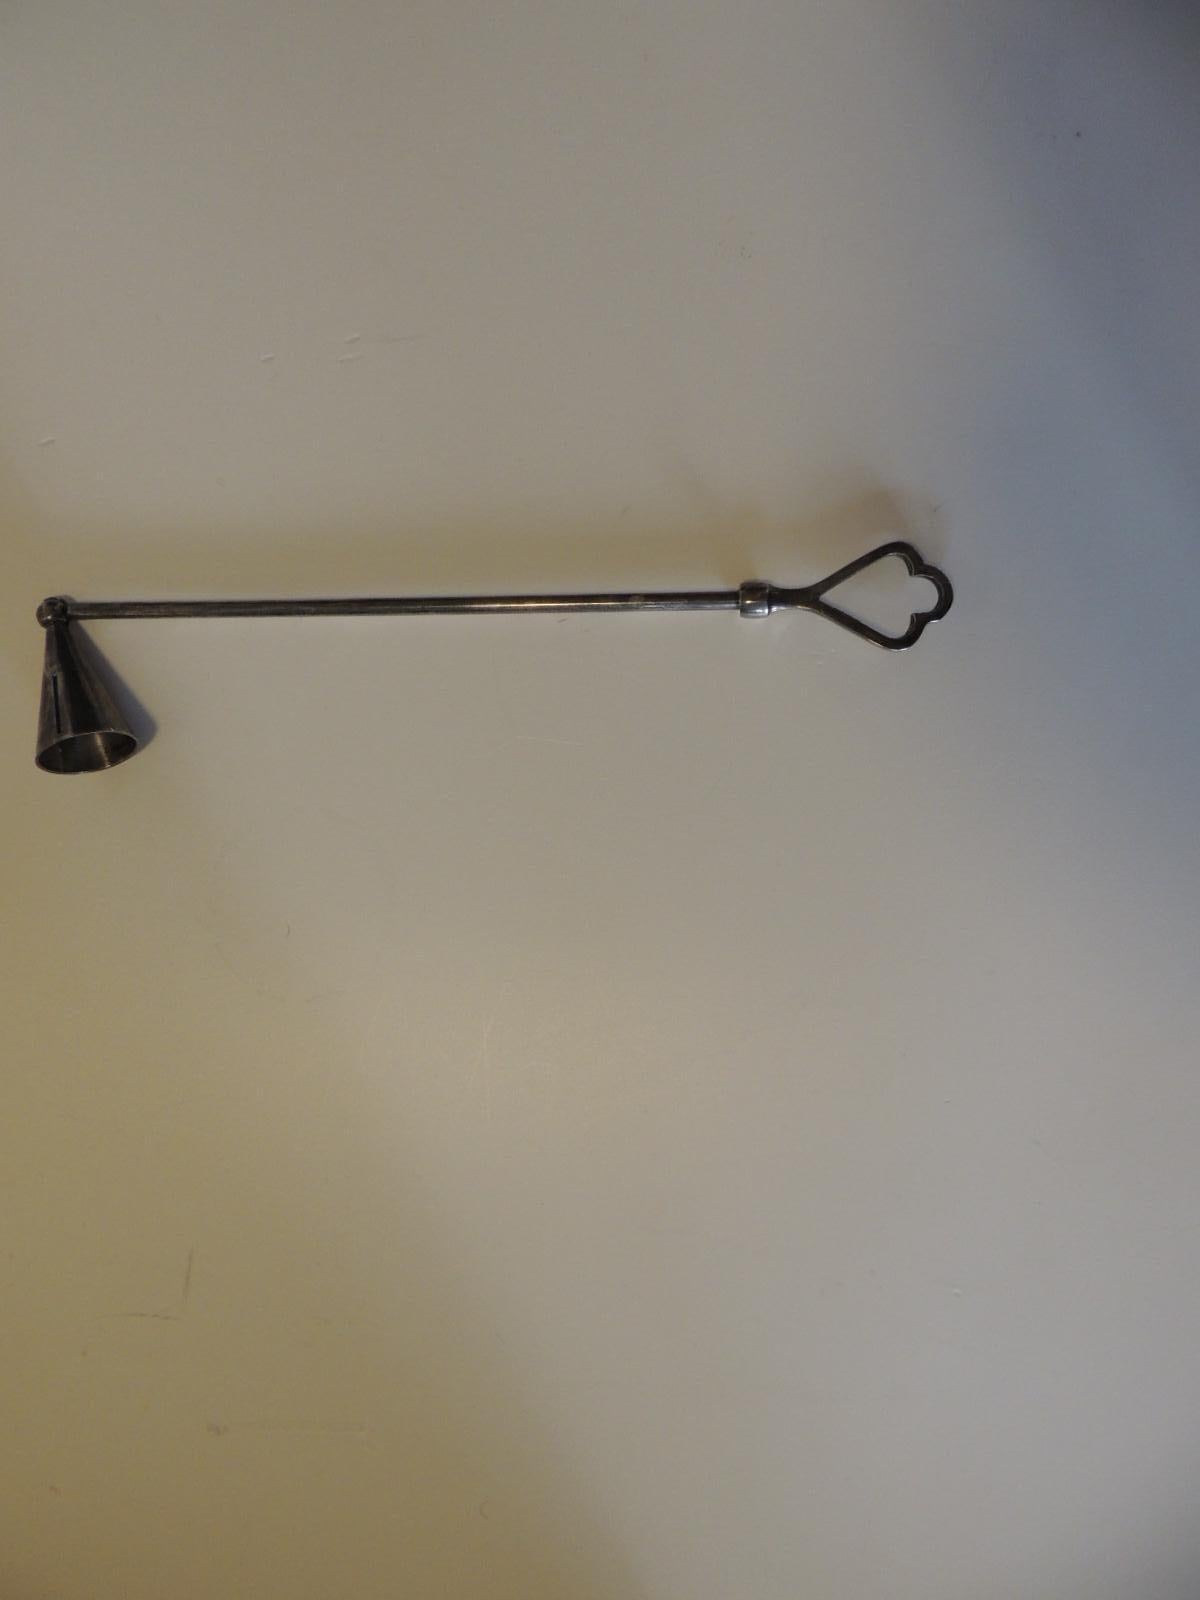 Vintage articulated polished chrome candle snuffer
with pierced handle.
Size: 13